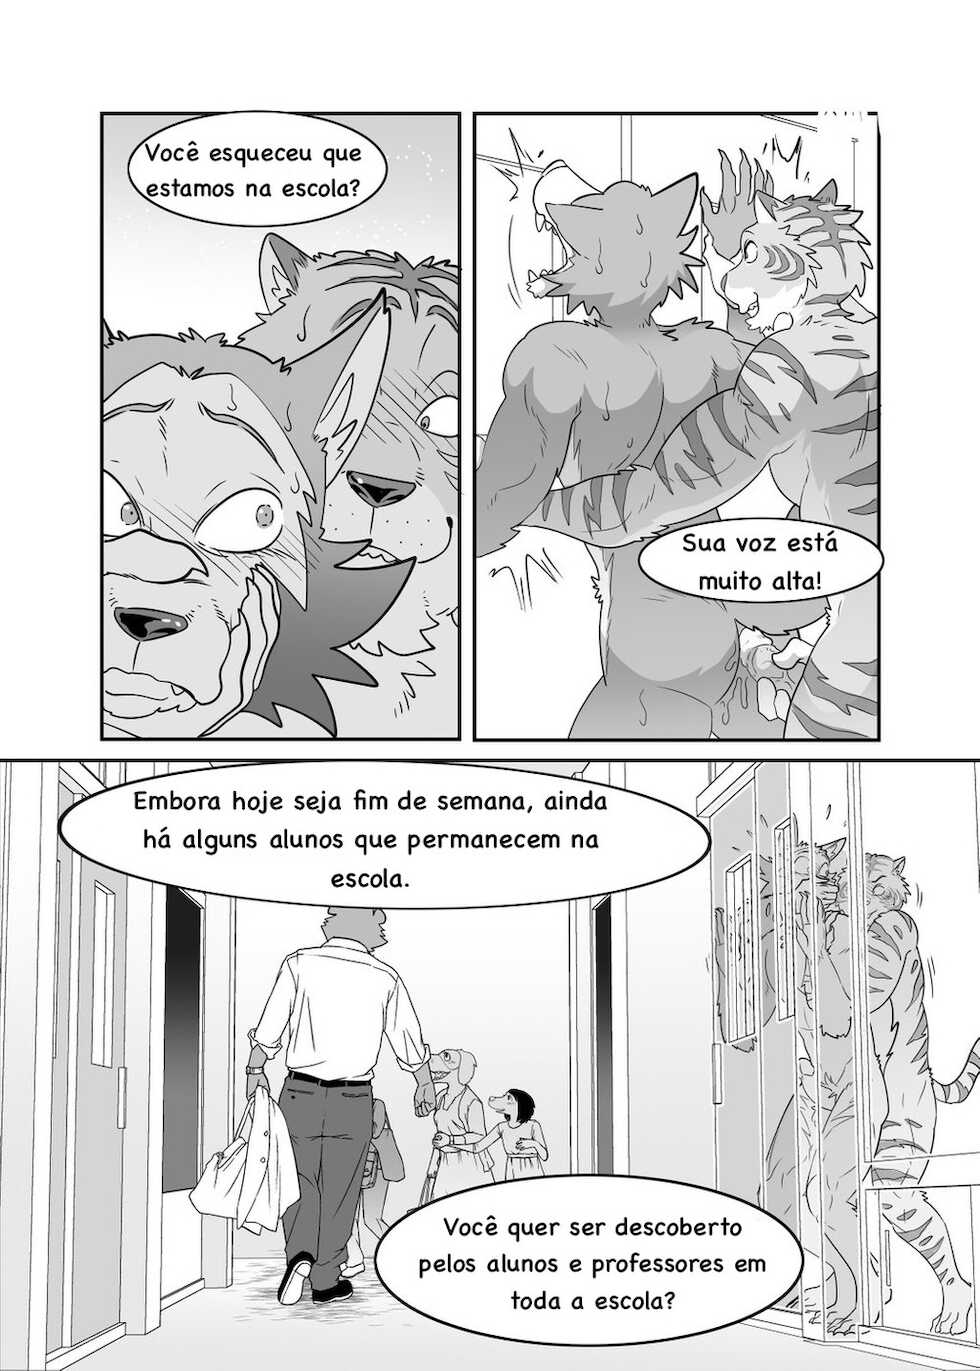 [Kumahachi] Sex-Education from Tiger and Deer – BEASTARS dj [Portuguese] - Page 20